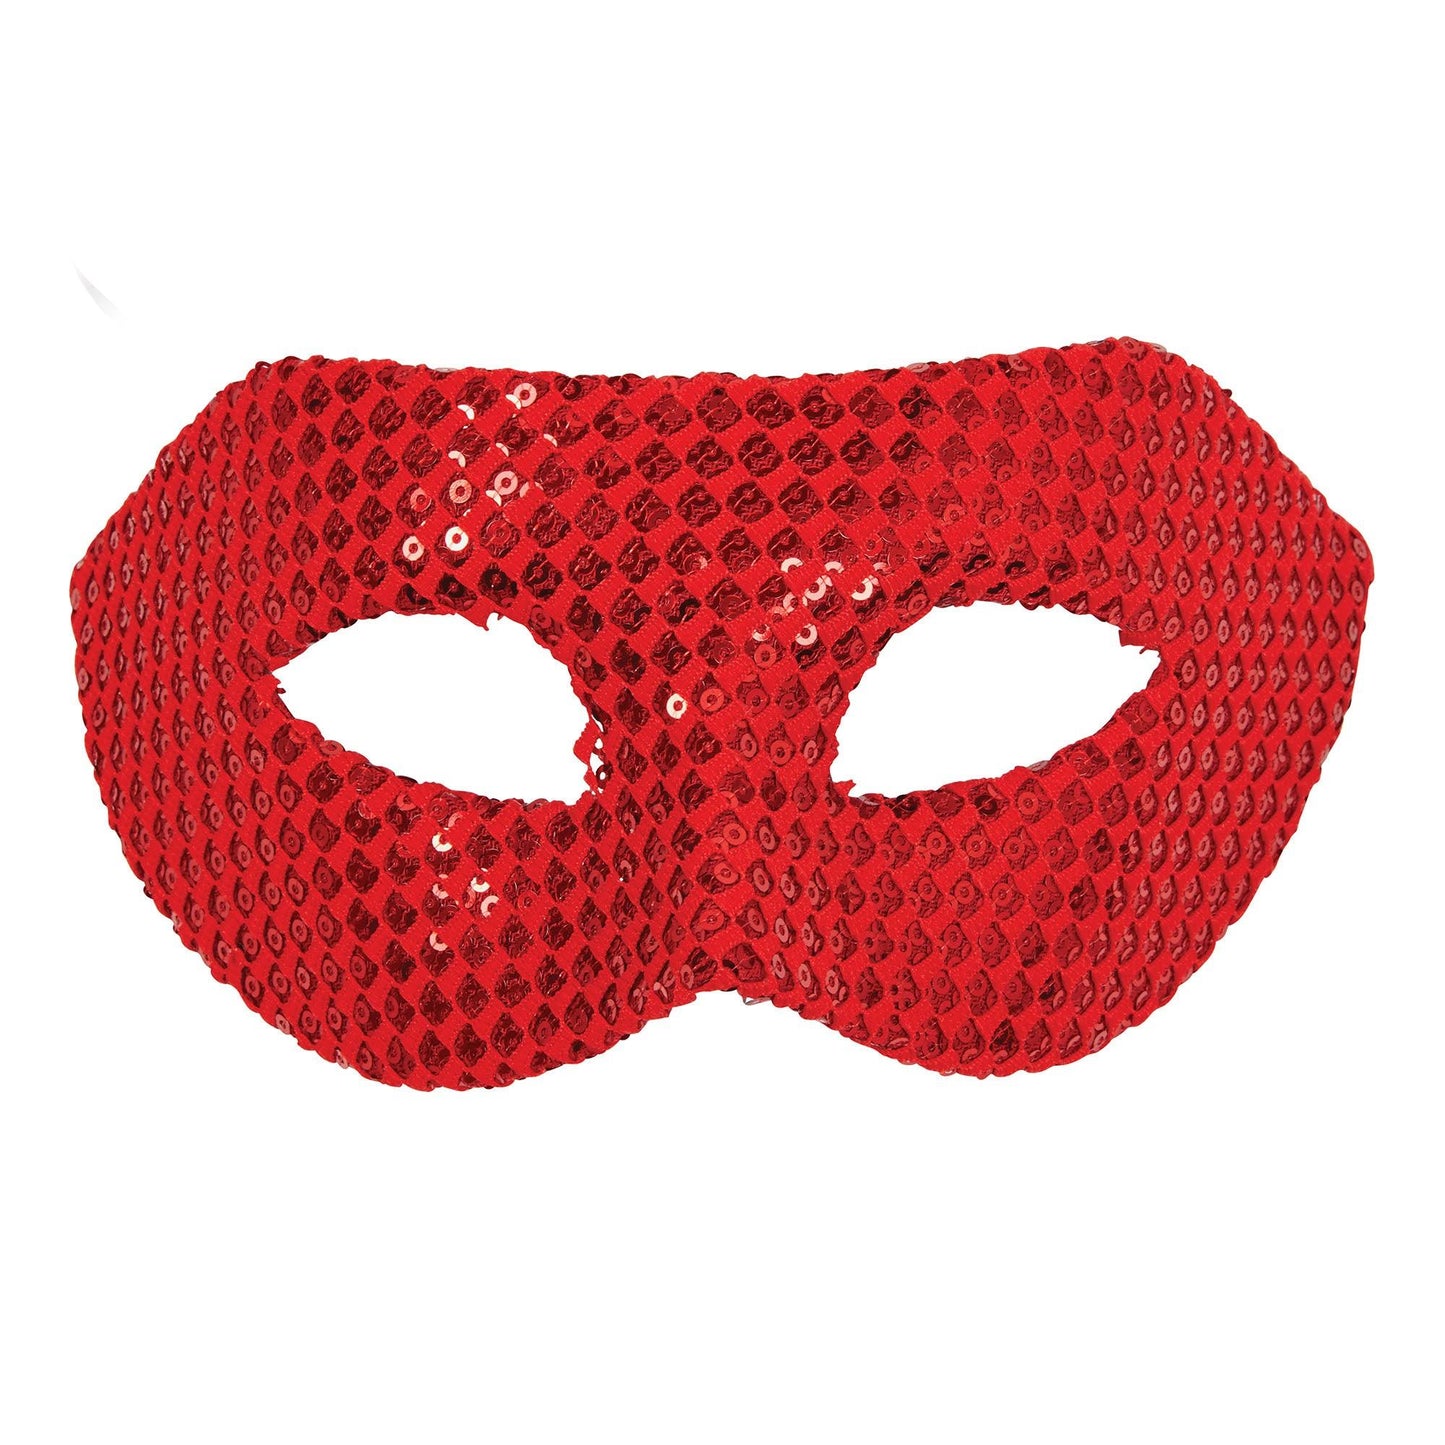 Sequin Eyemask Red - Labreeze